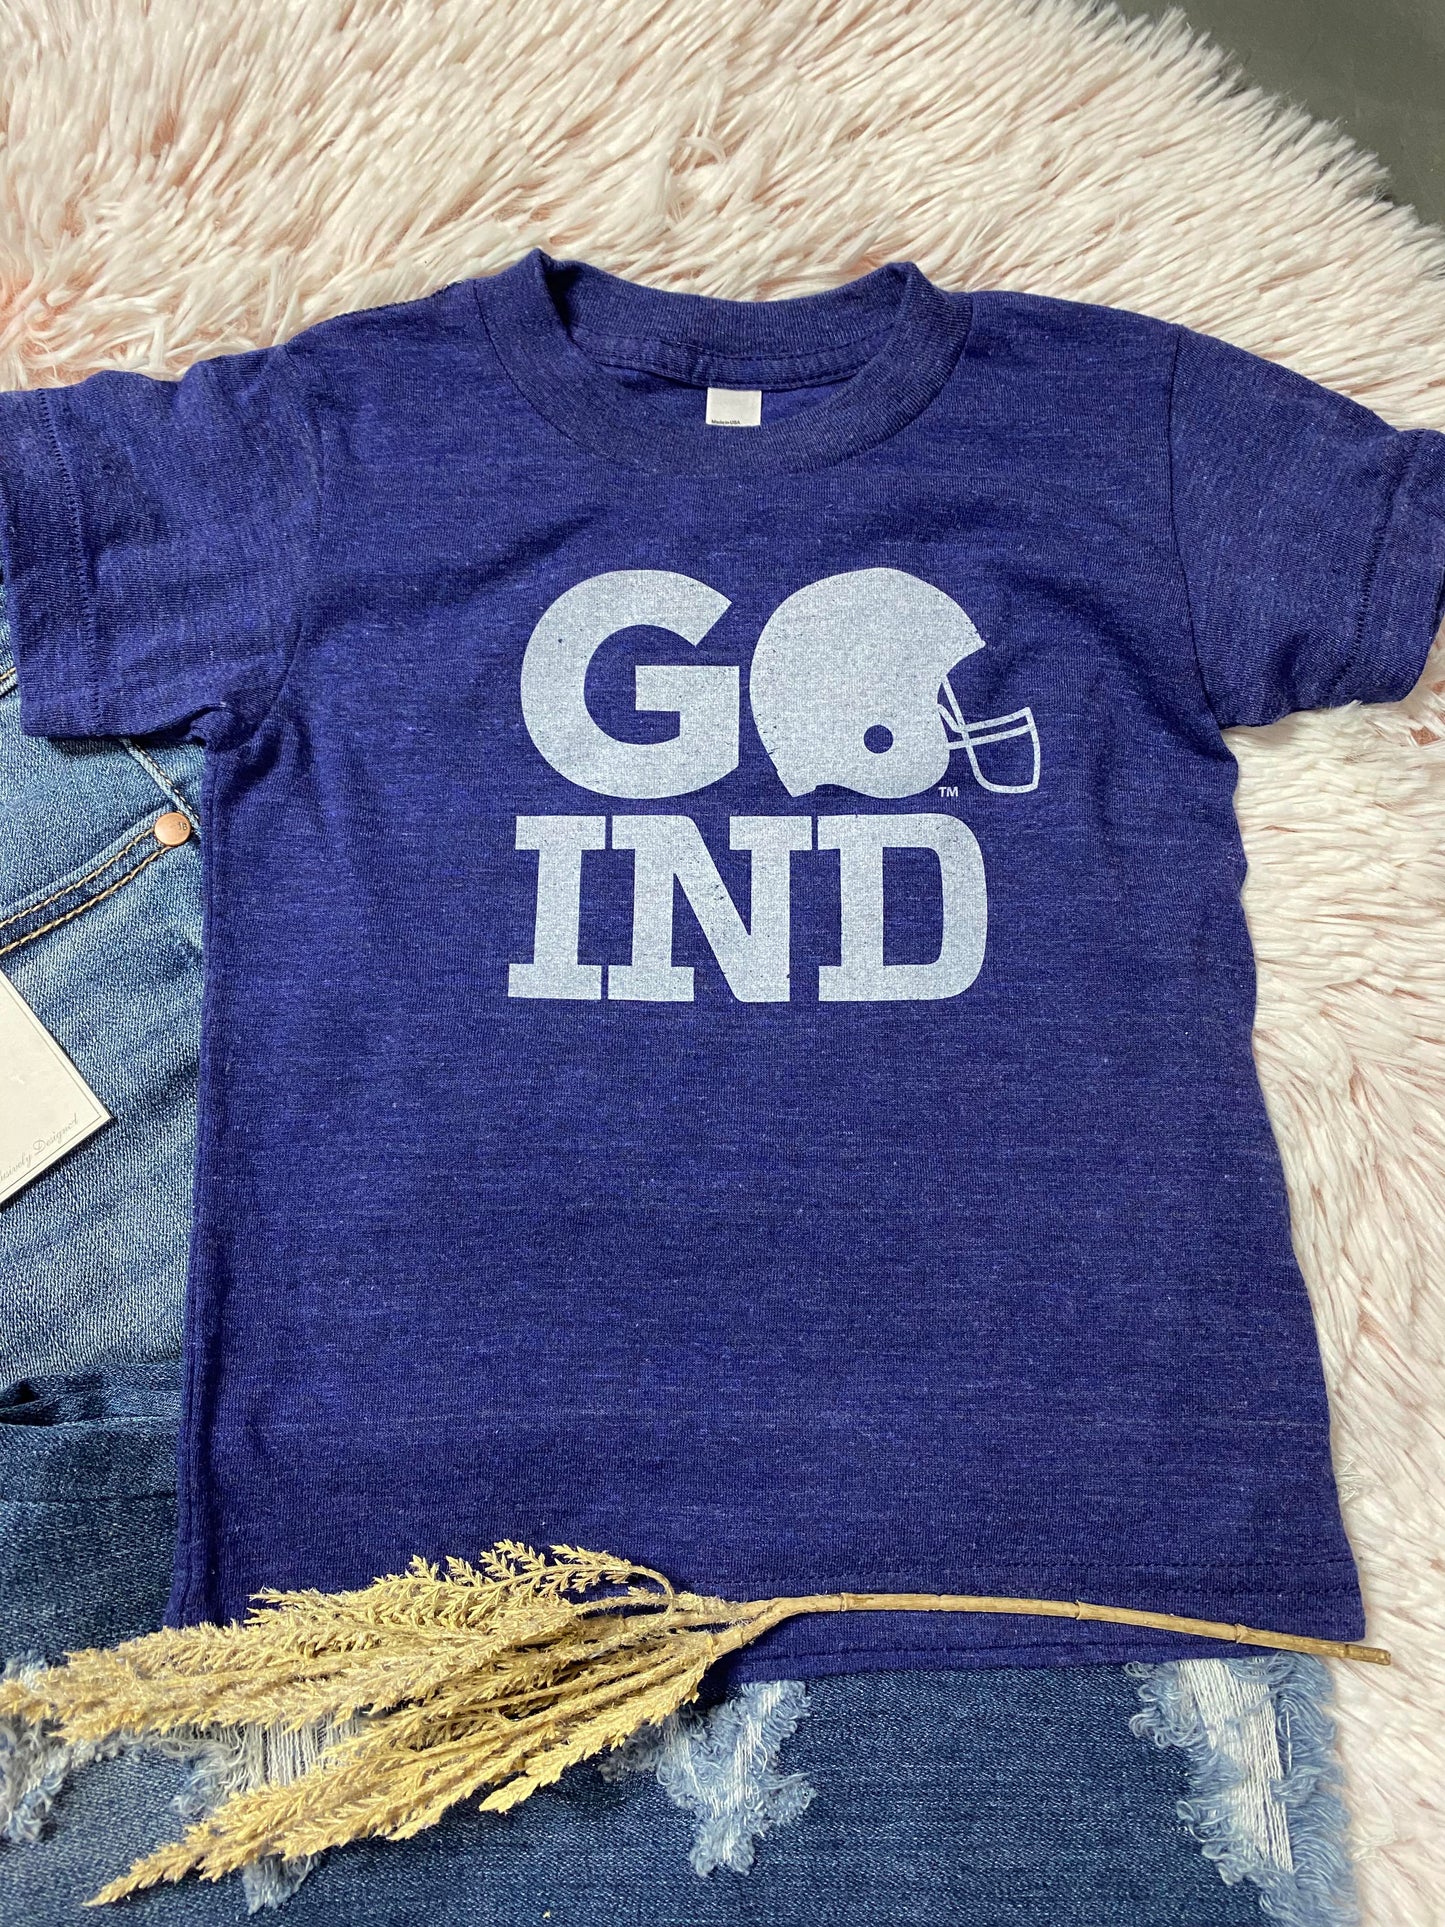 Go IND - Child Size